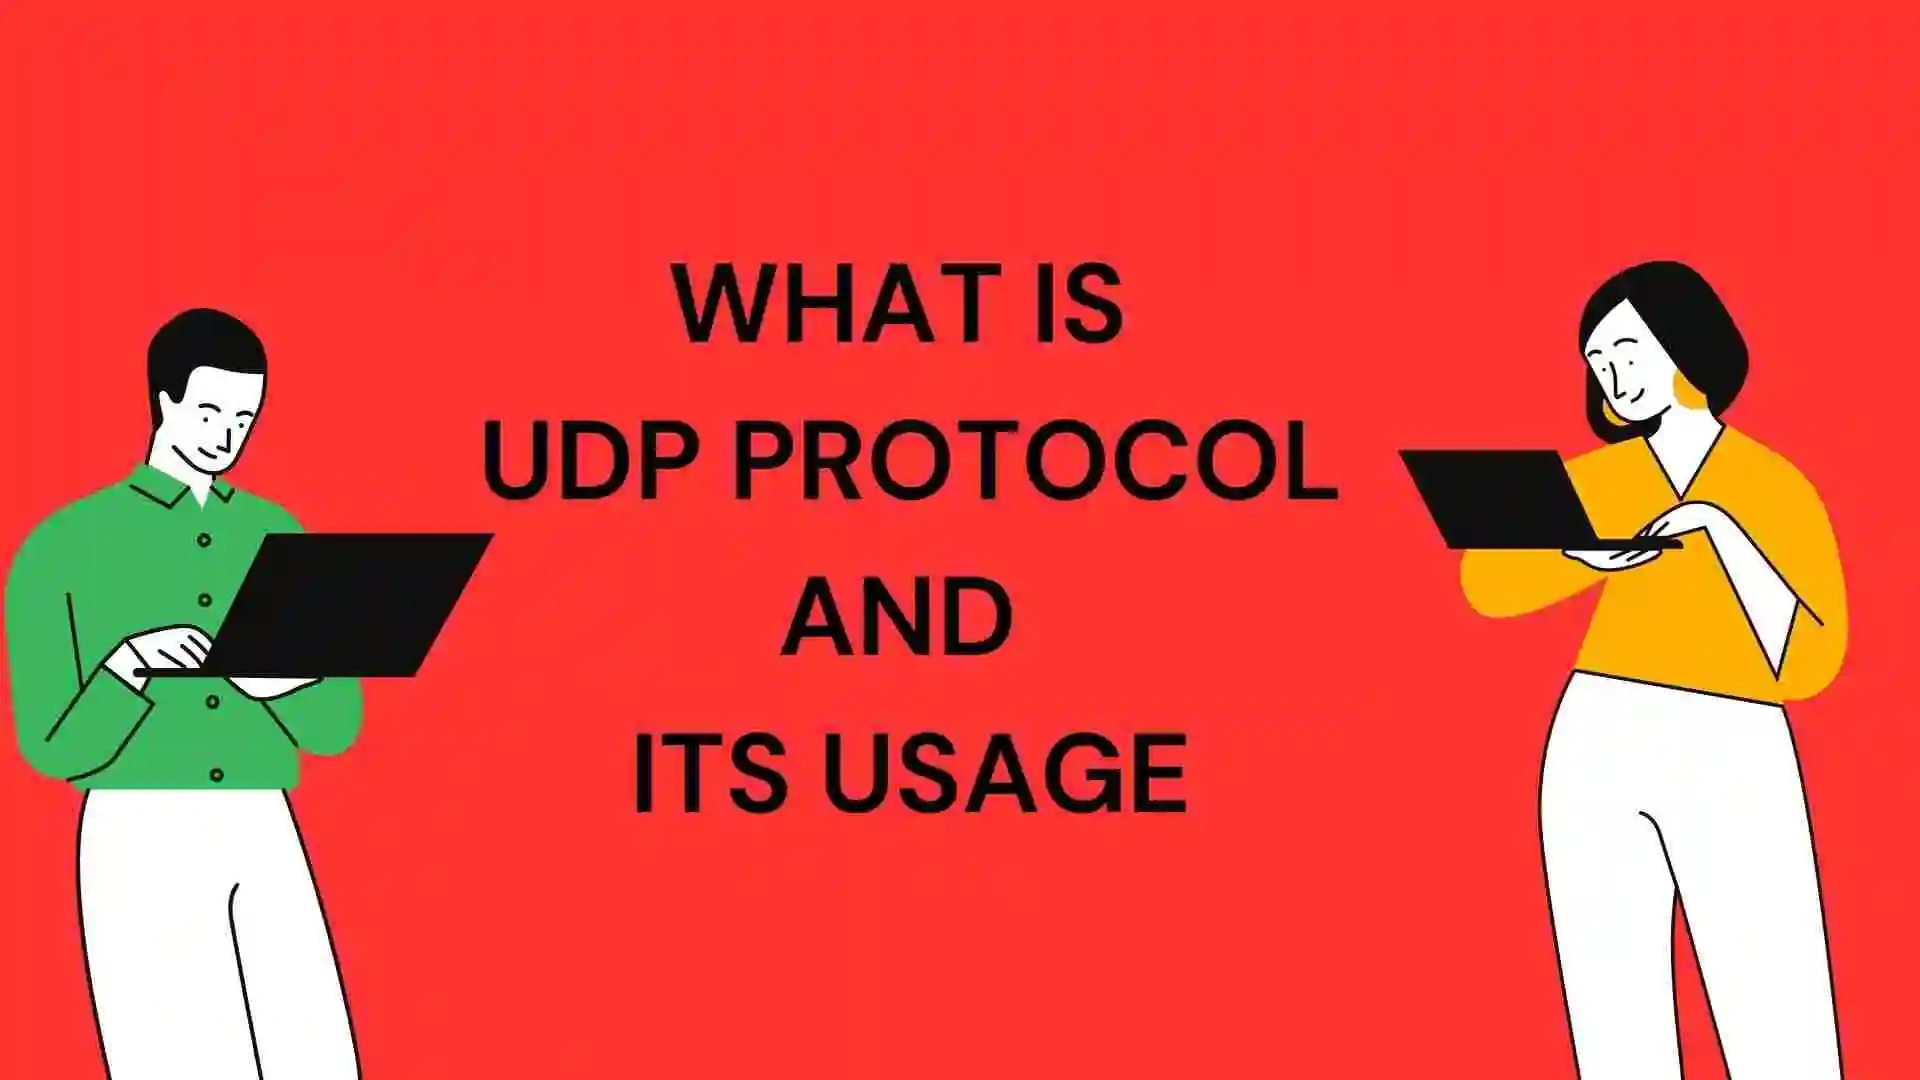 UDP Protocol is also used in some network diagnostic tools, such as traceroute and ping, and measure the latency between two endpoints.